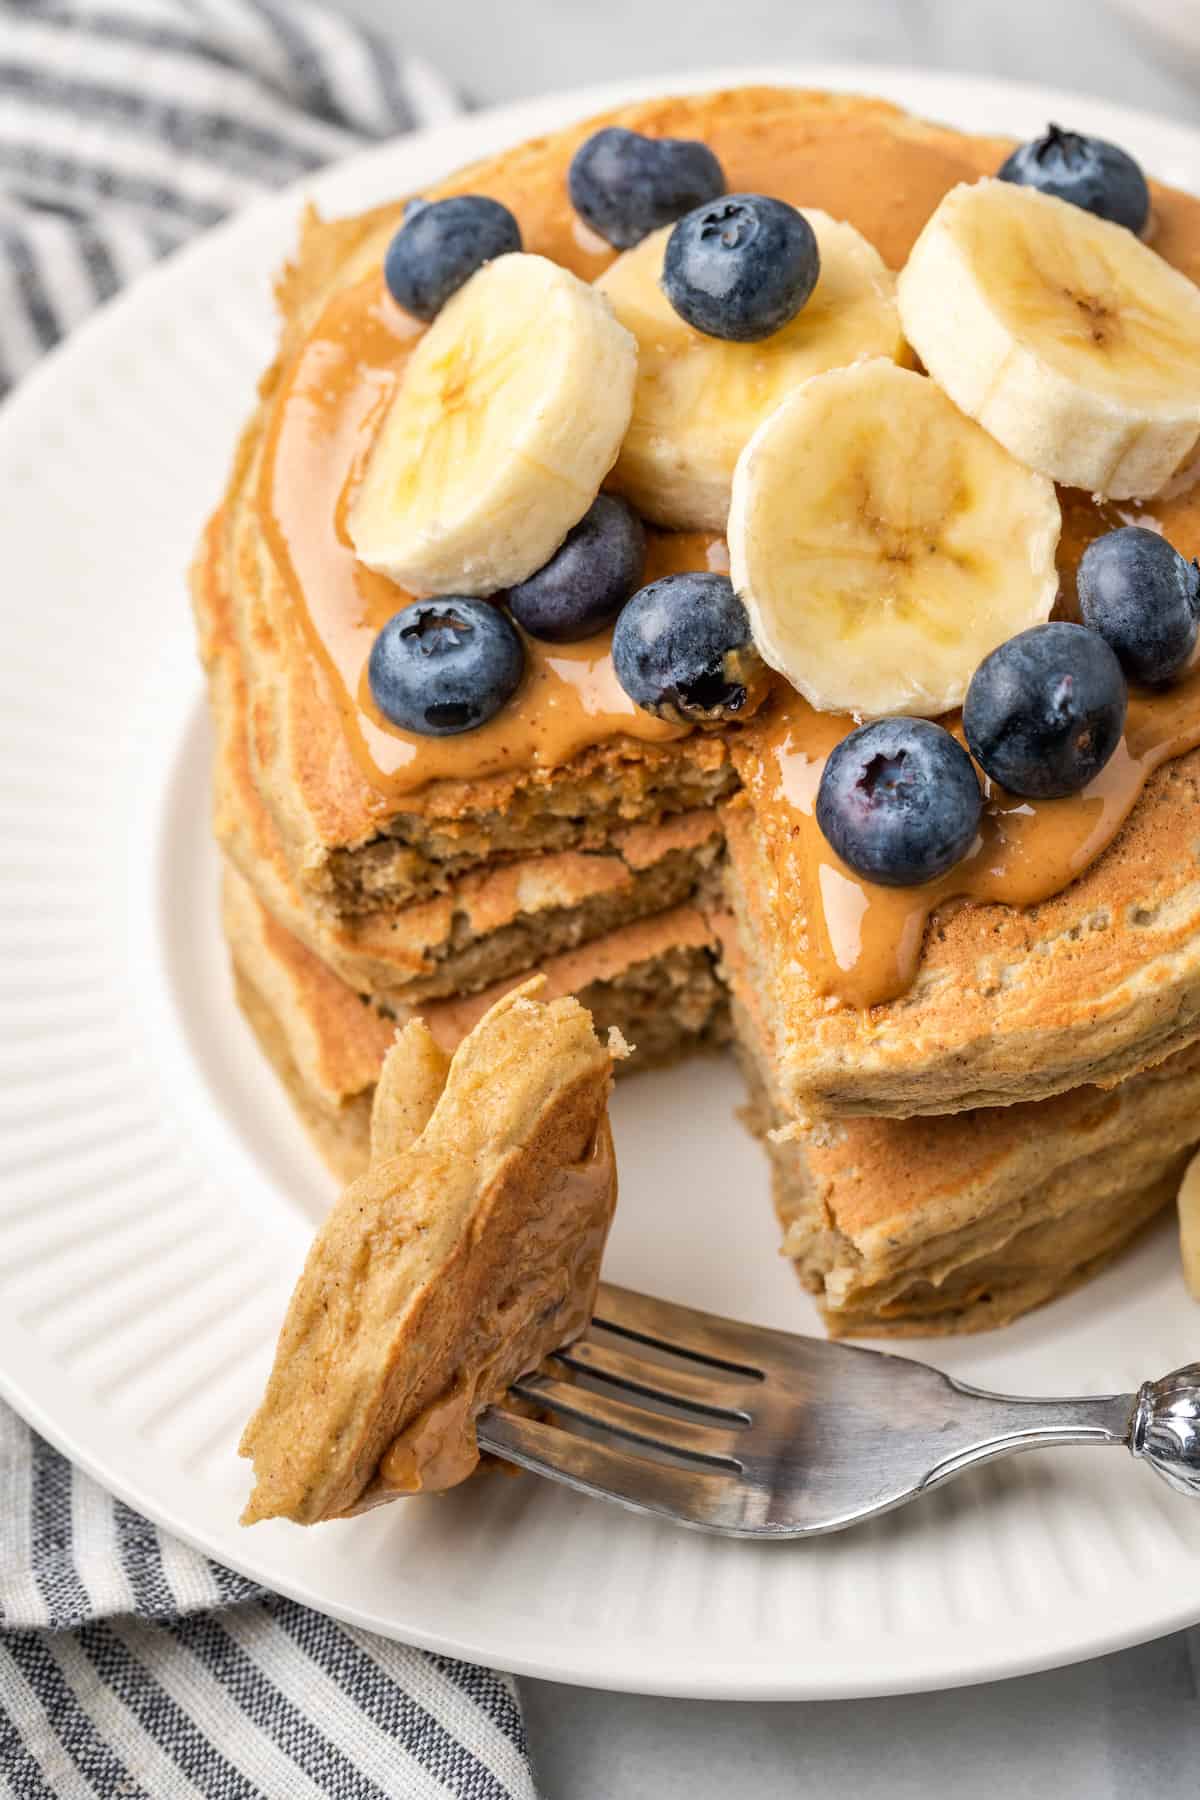 A fork cuts into a stack of gluten-free protein pancakes topped with blueberries and sliced bananas.